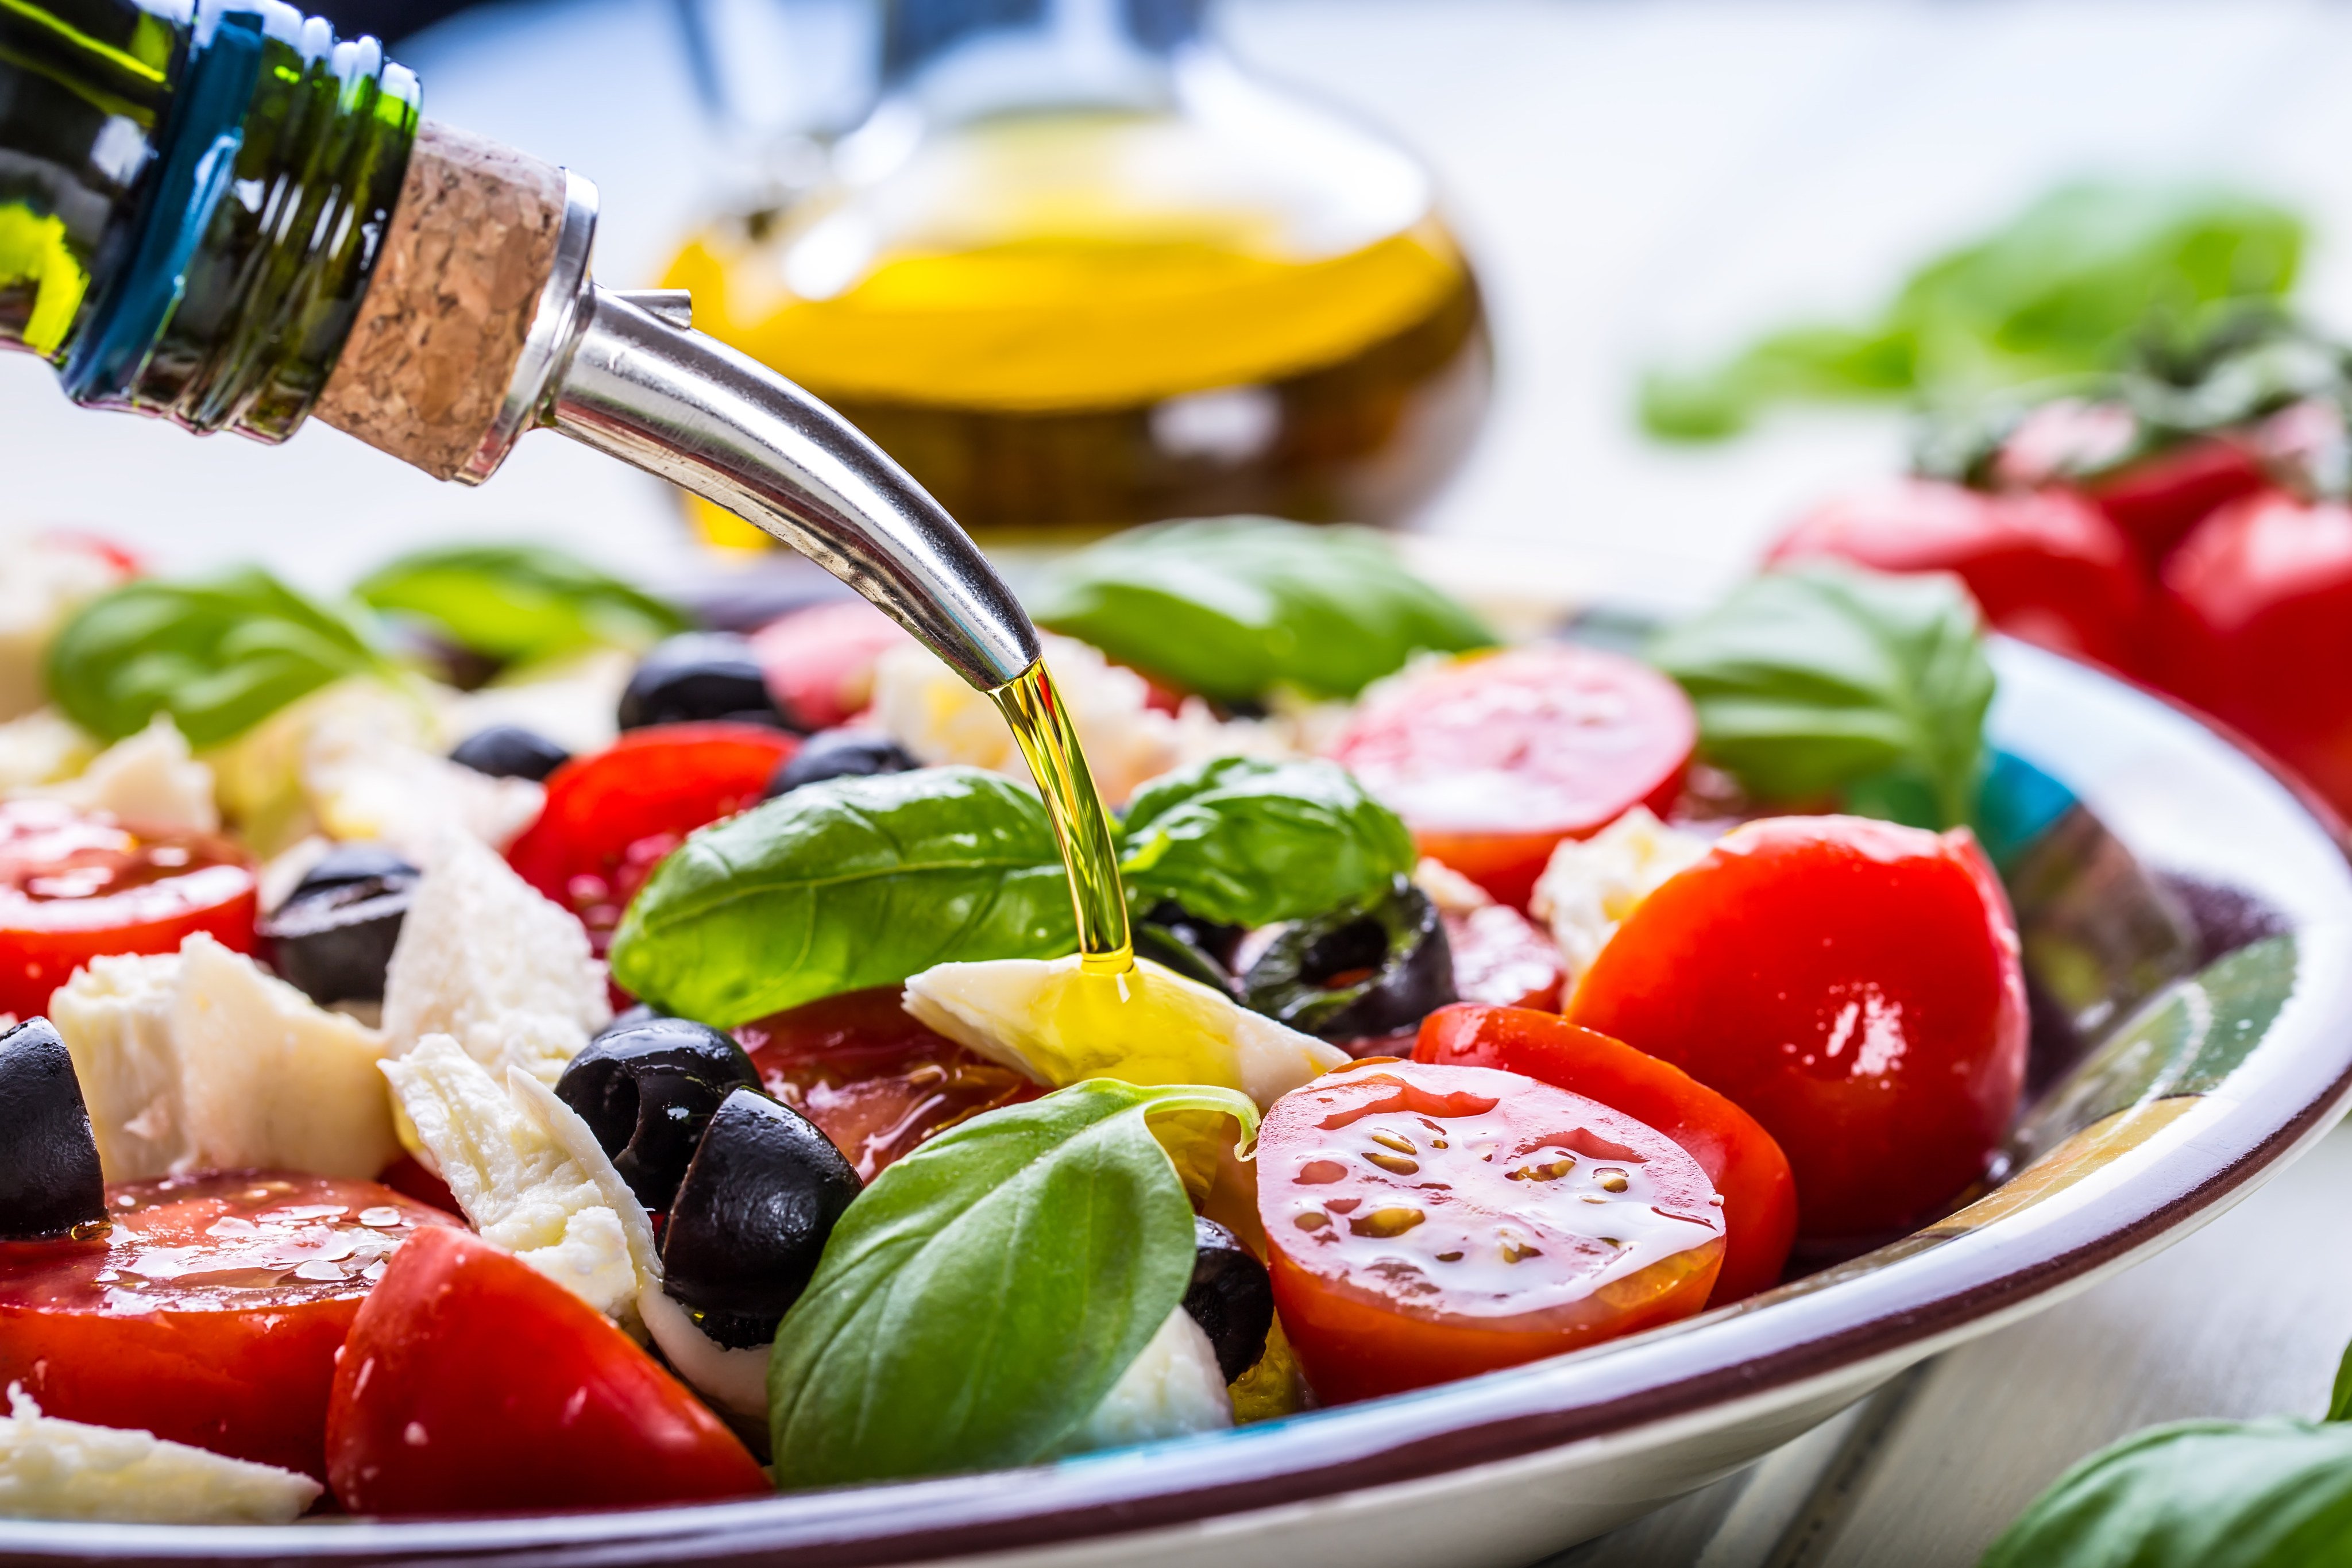 Extra virgin olive oil is a key component of both the Mediterranean and the Mind Diet. It is thought to have protective effects against dementia.
Photo: Shutterstock